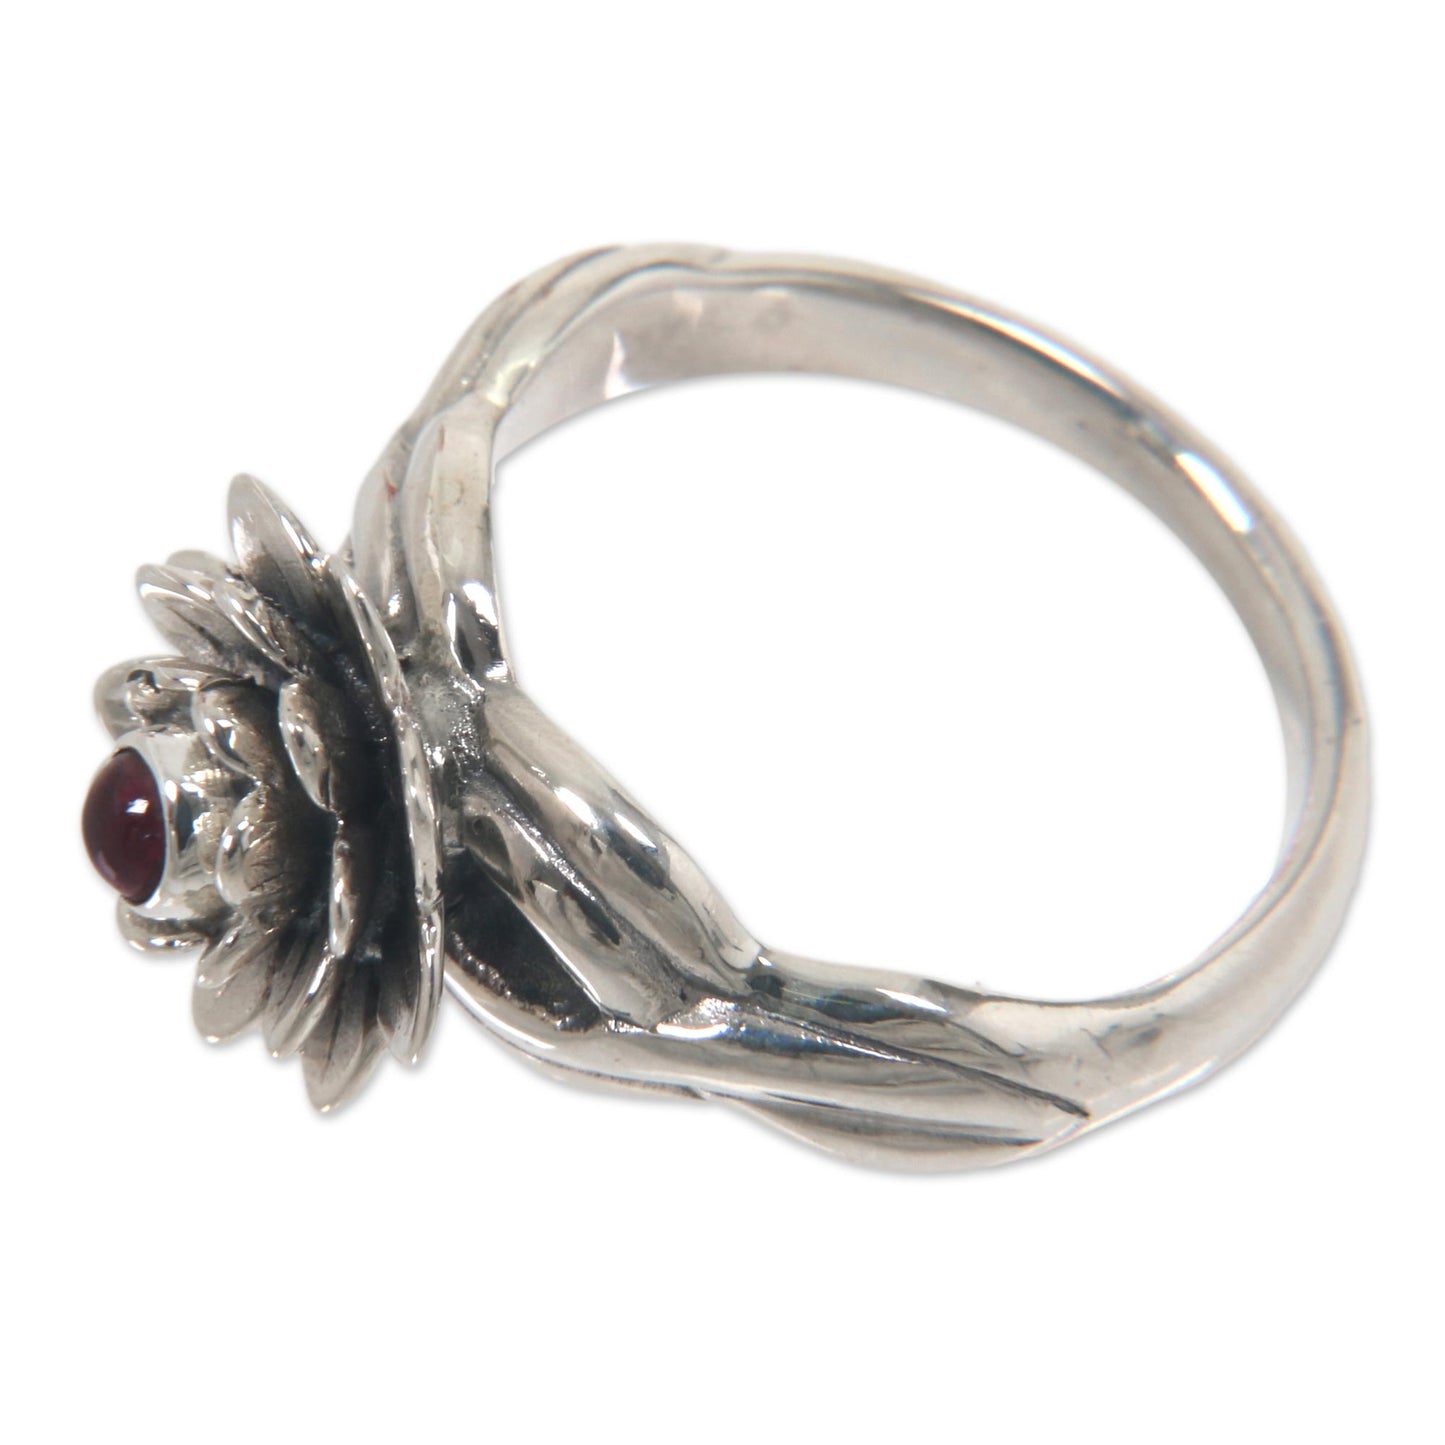 Red-Eyed Lotus Handcrafted Floral Sterling Silver and Garnet Ring